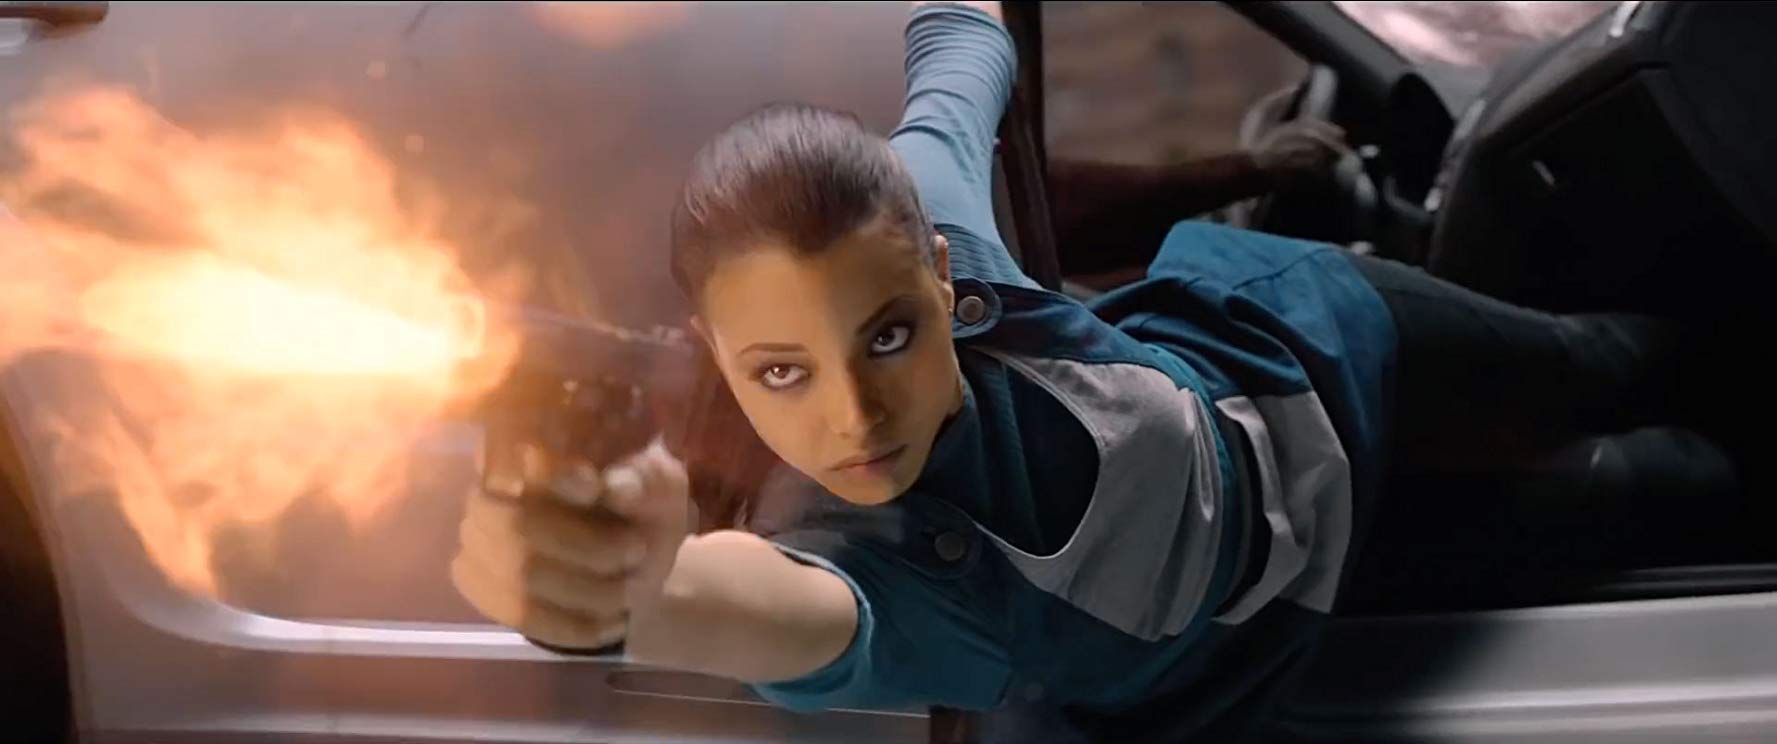 Review: Charlie's Angels (2019) - Girls With Guns.